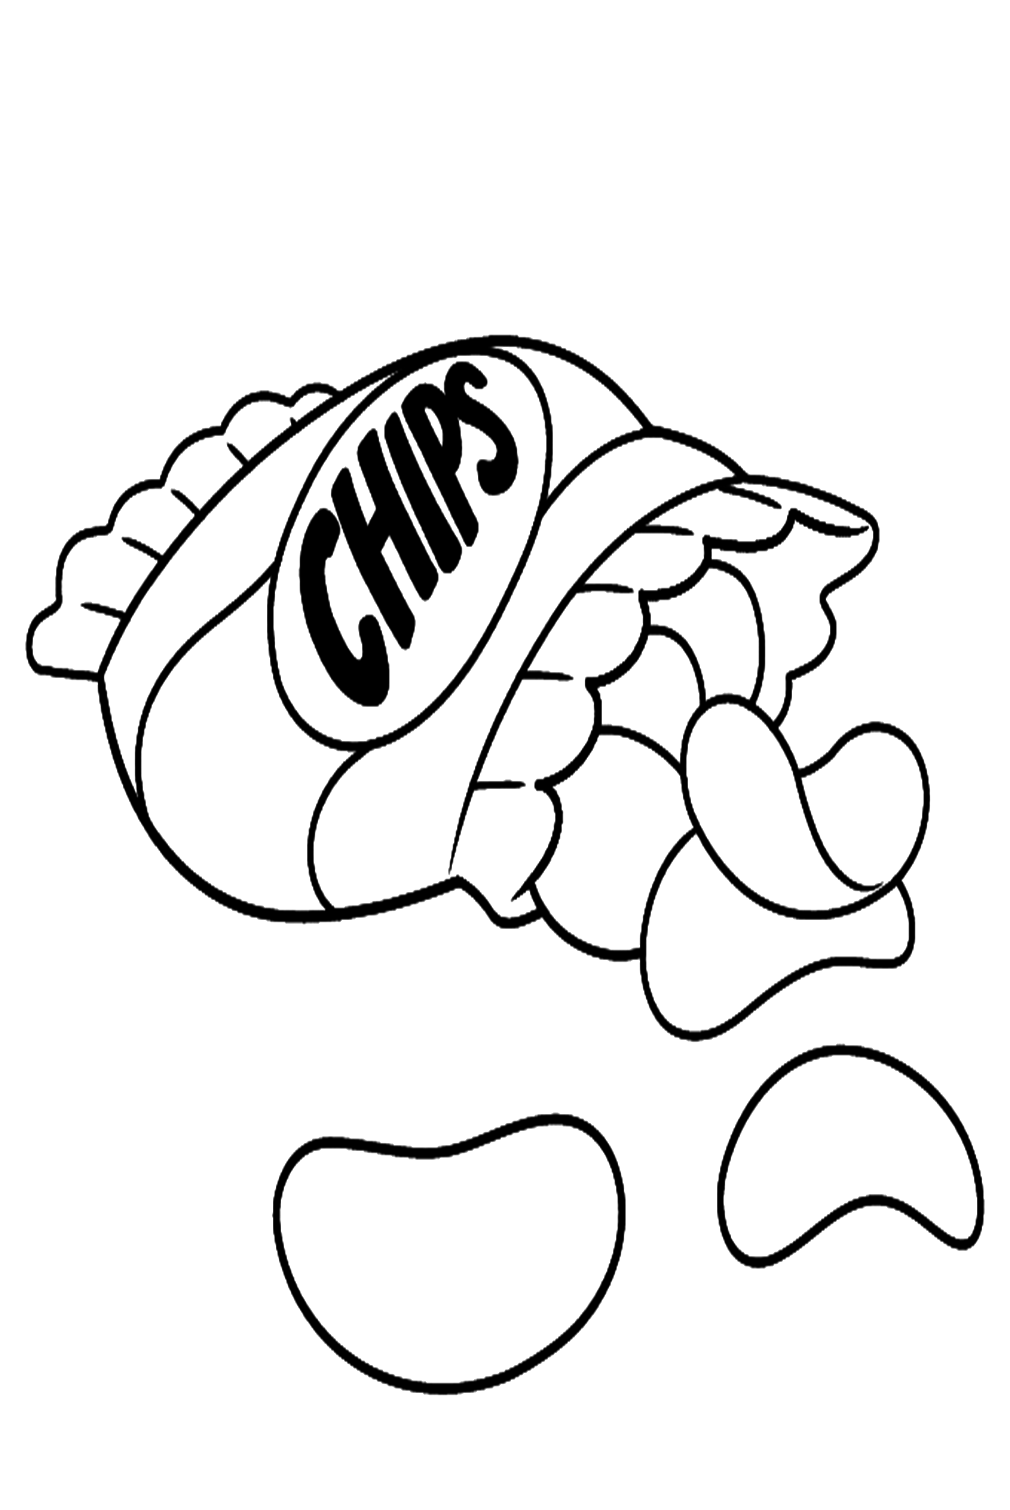 Potato Chips Coloring Page - Free Printable Coloring Pages